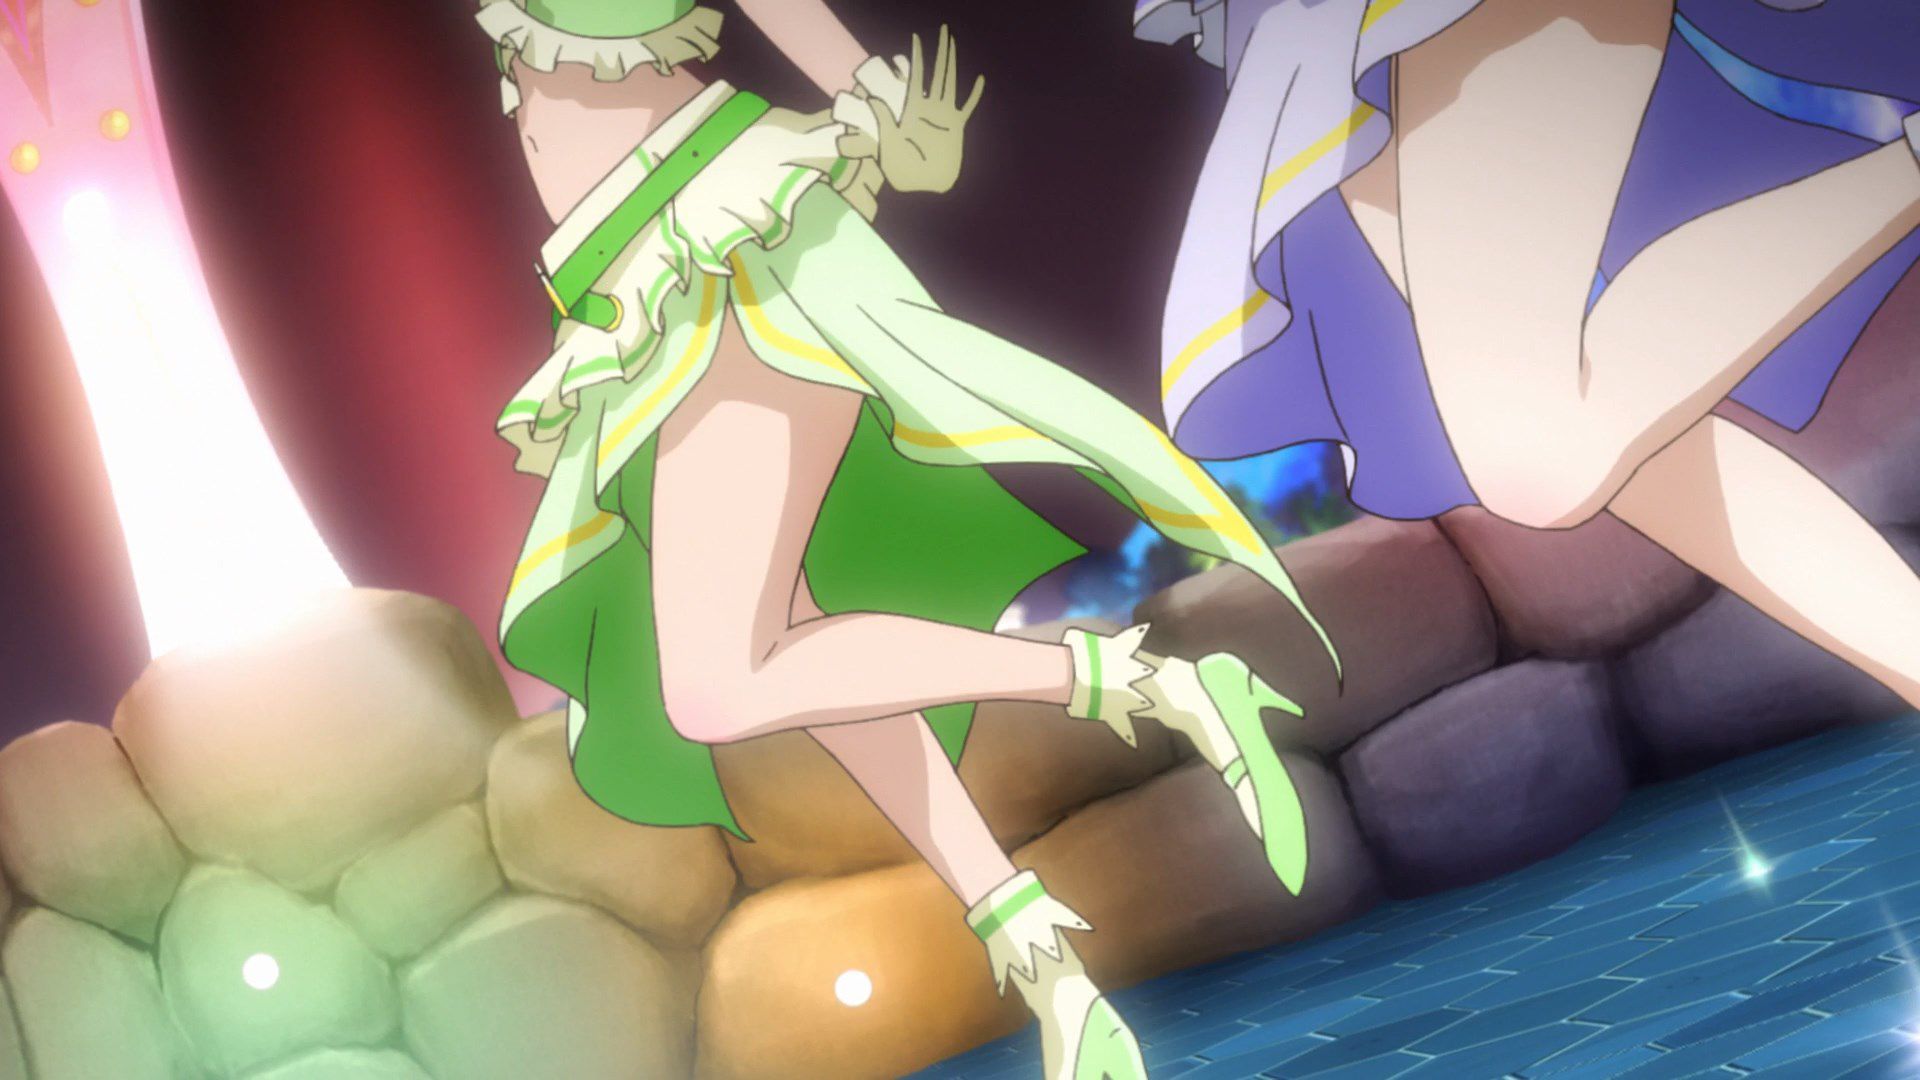 [God images] "love live! ' Μm ' PV's leg is too erotic everyone wakes up to a leg fetish of wwwww 52